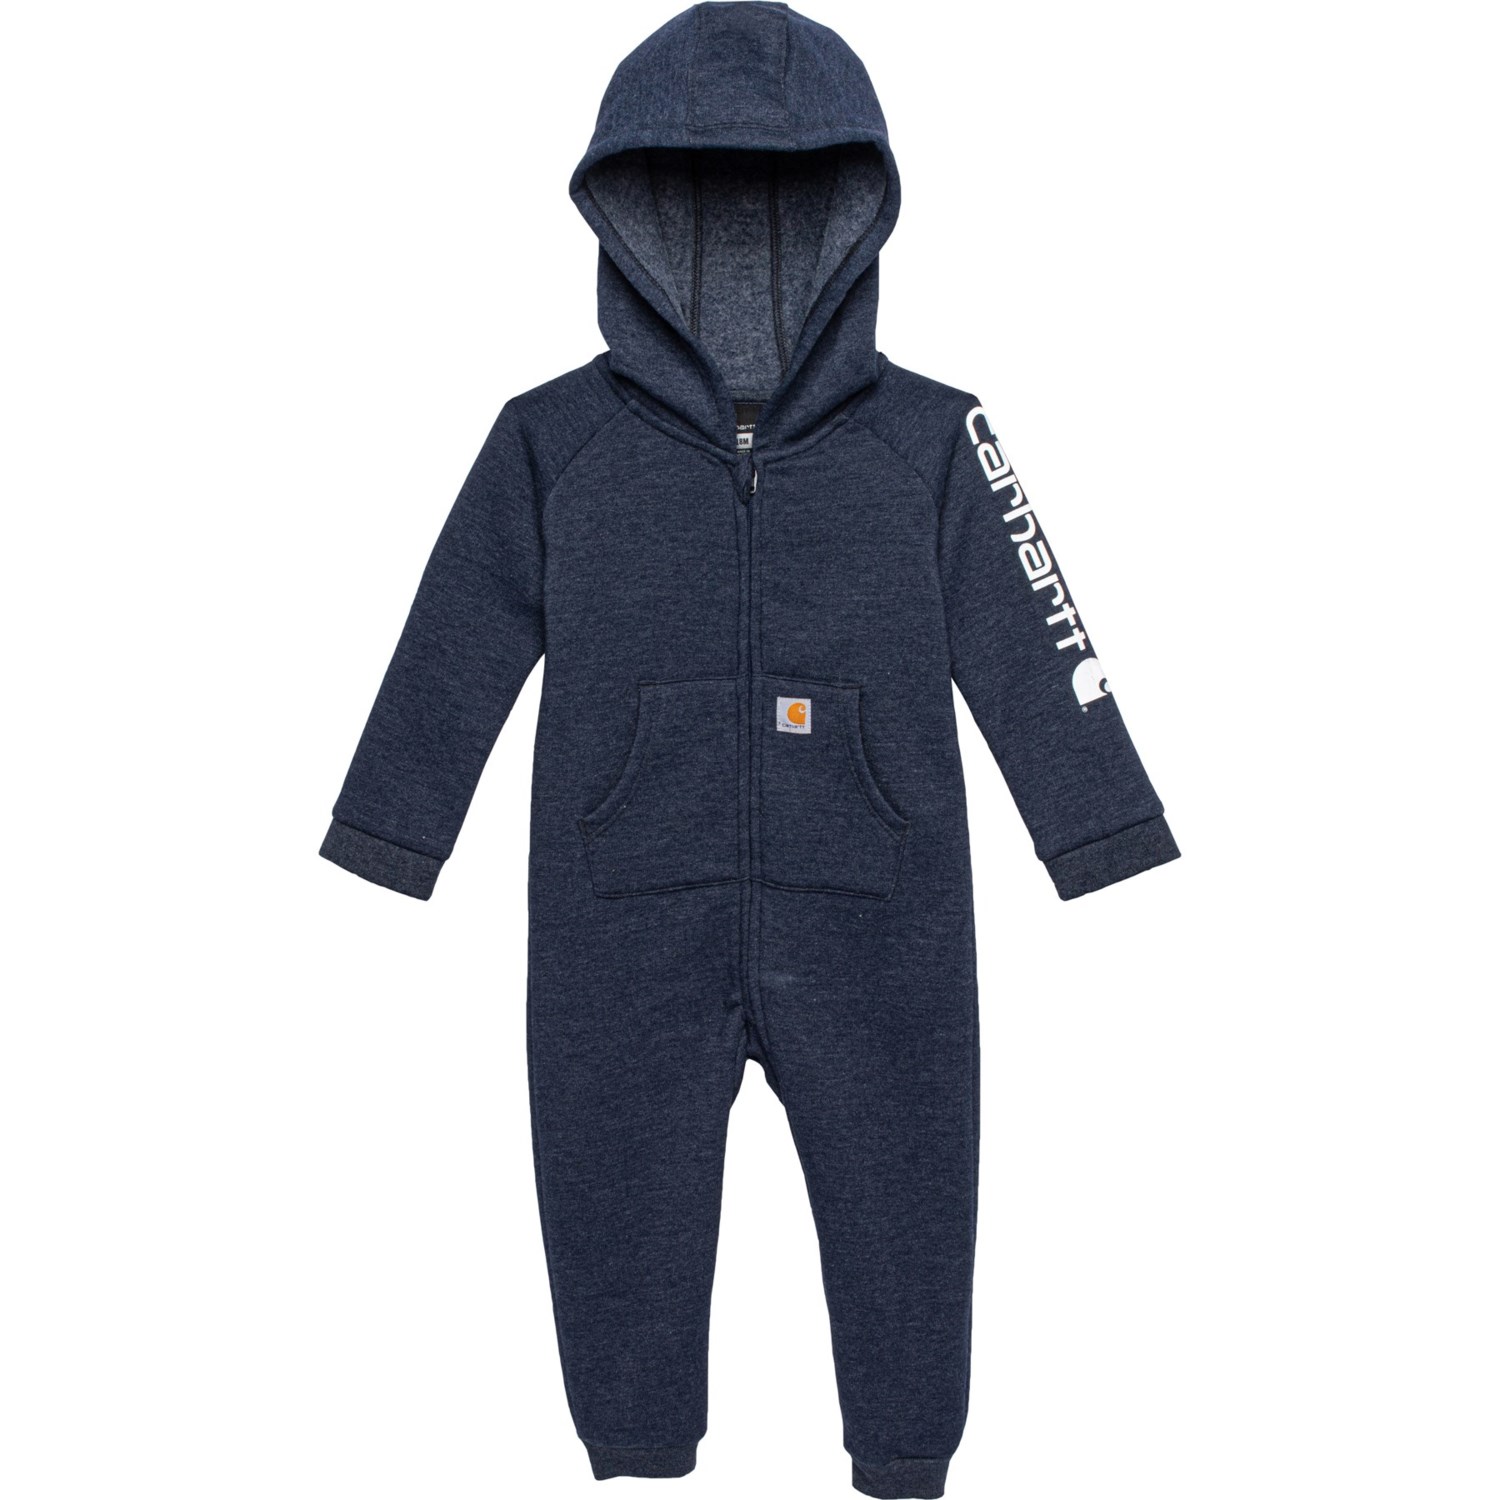 babies – Crafted in Carhartt